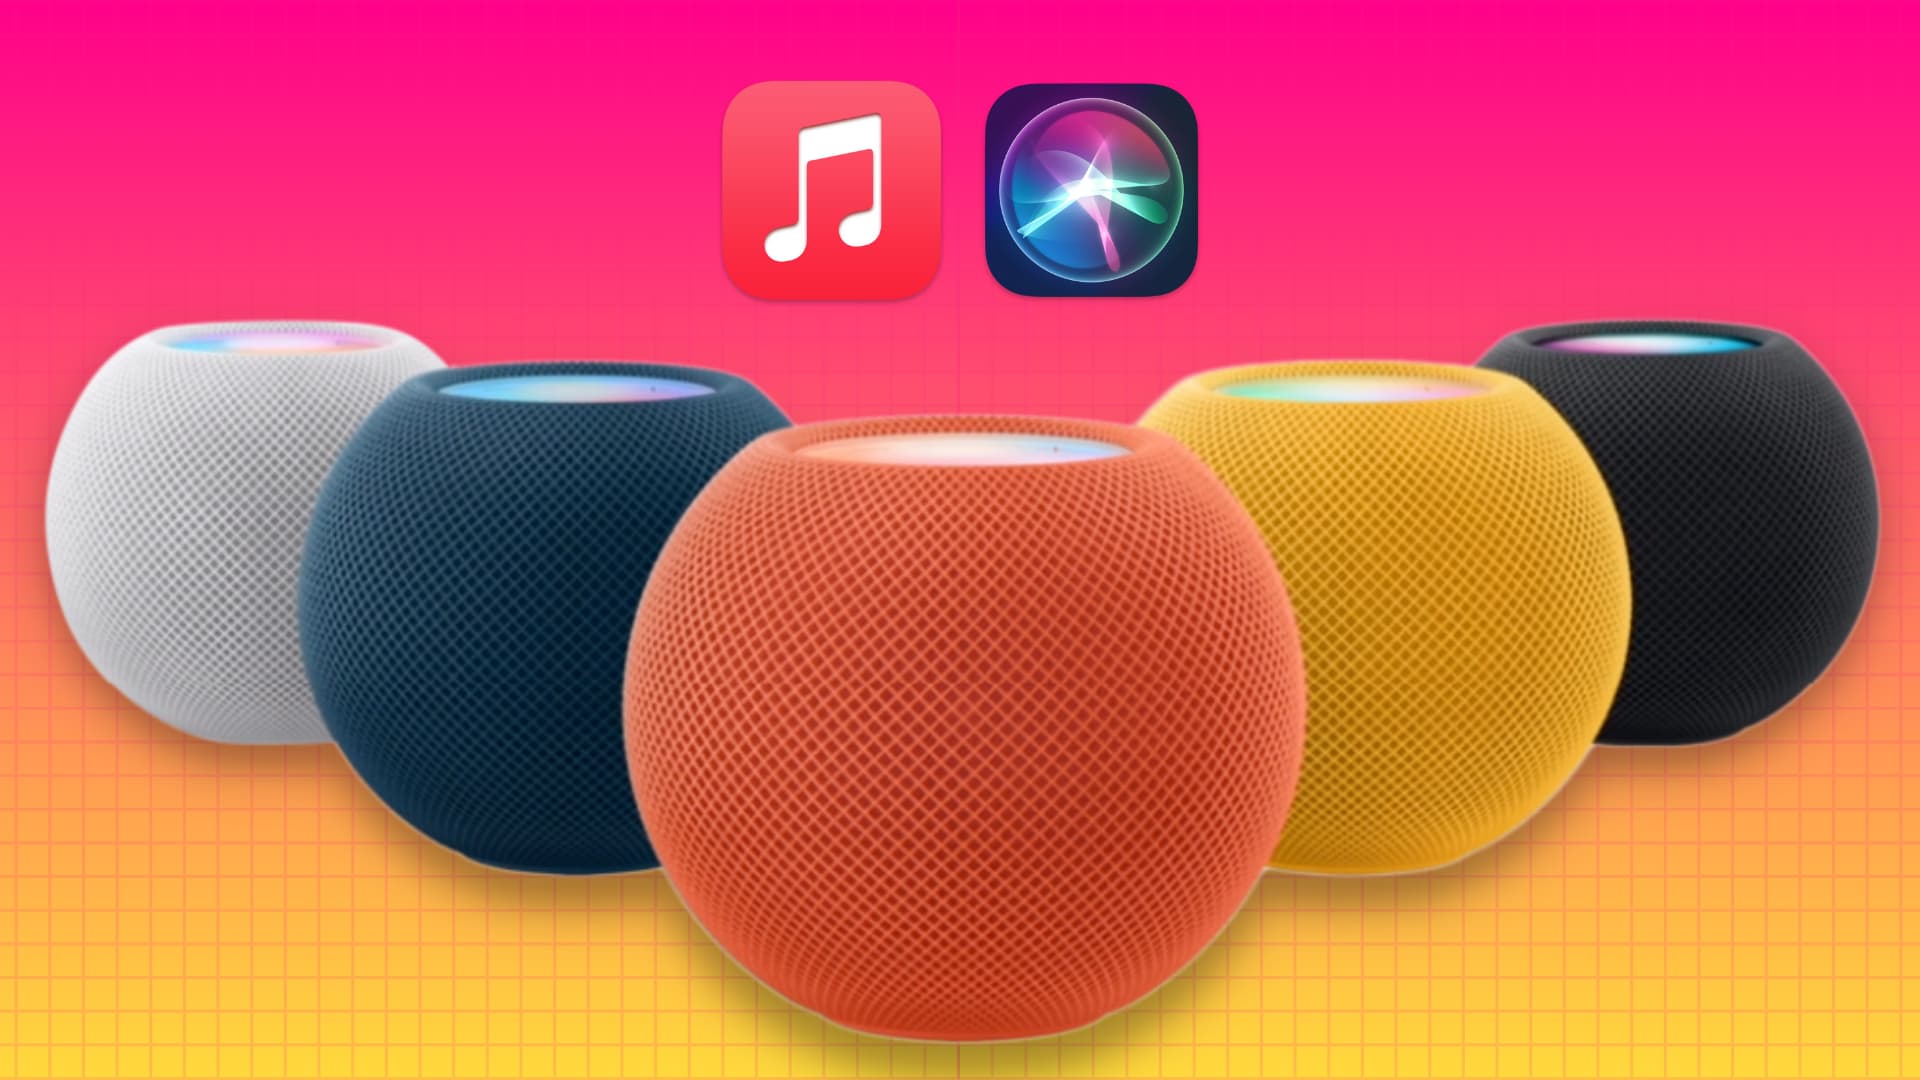 HomePod’s Siri now learns your default music app like on iPhone, but removes the manual option from the Home app